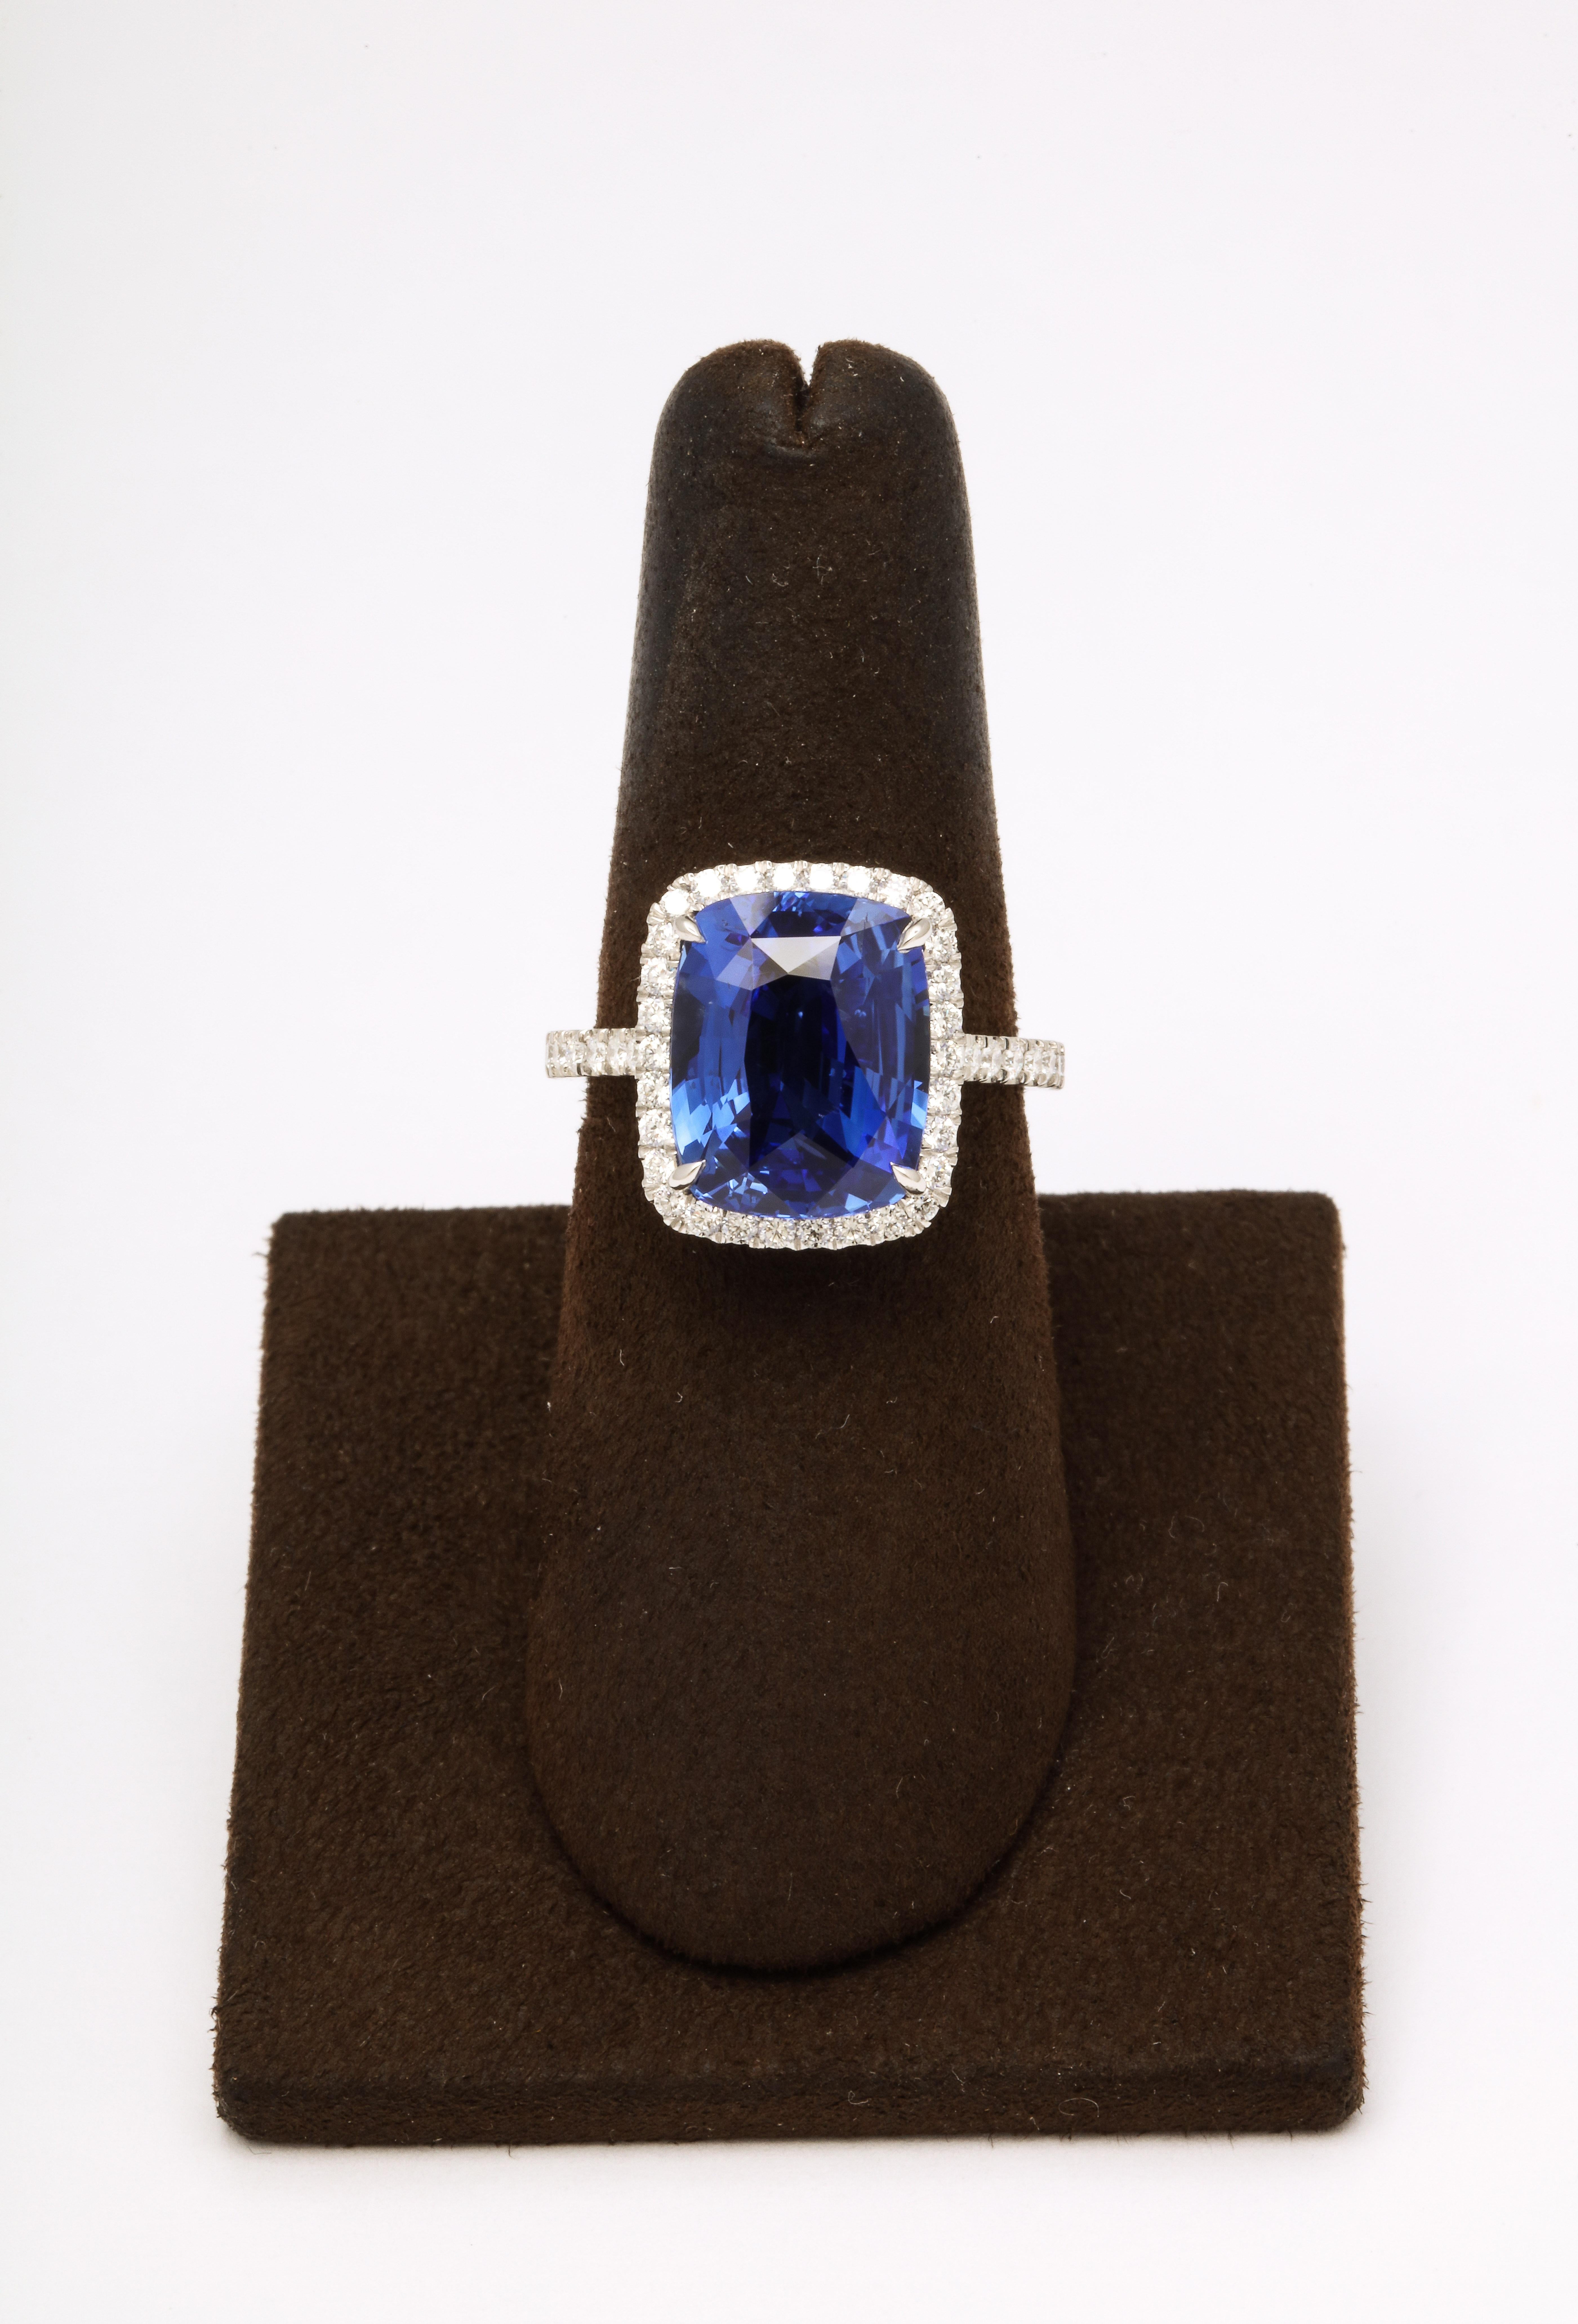 
A fabulous sapphire set in a beautiful, and wearable diamond mounting. Full of sparkle and brilliance! 

A magnificent 7.15 carat Blue Sapphire set in a custom platinum halo diamond mounting with .65 carats of colorless white round brilliant cut